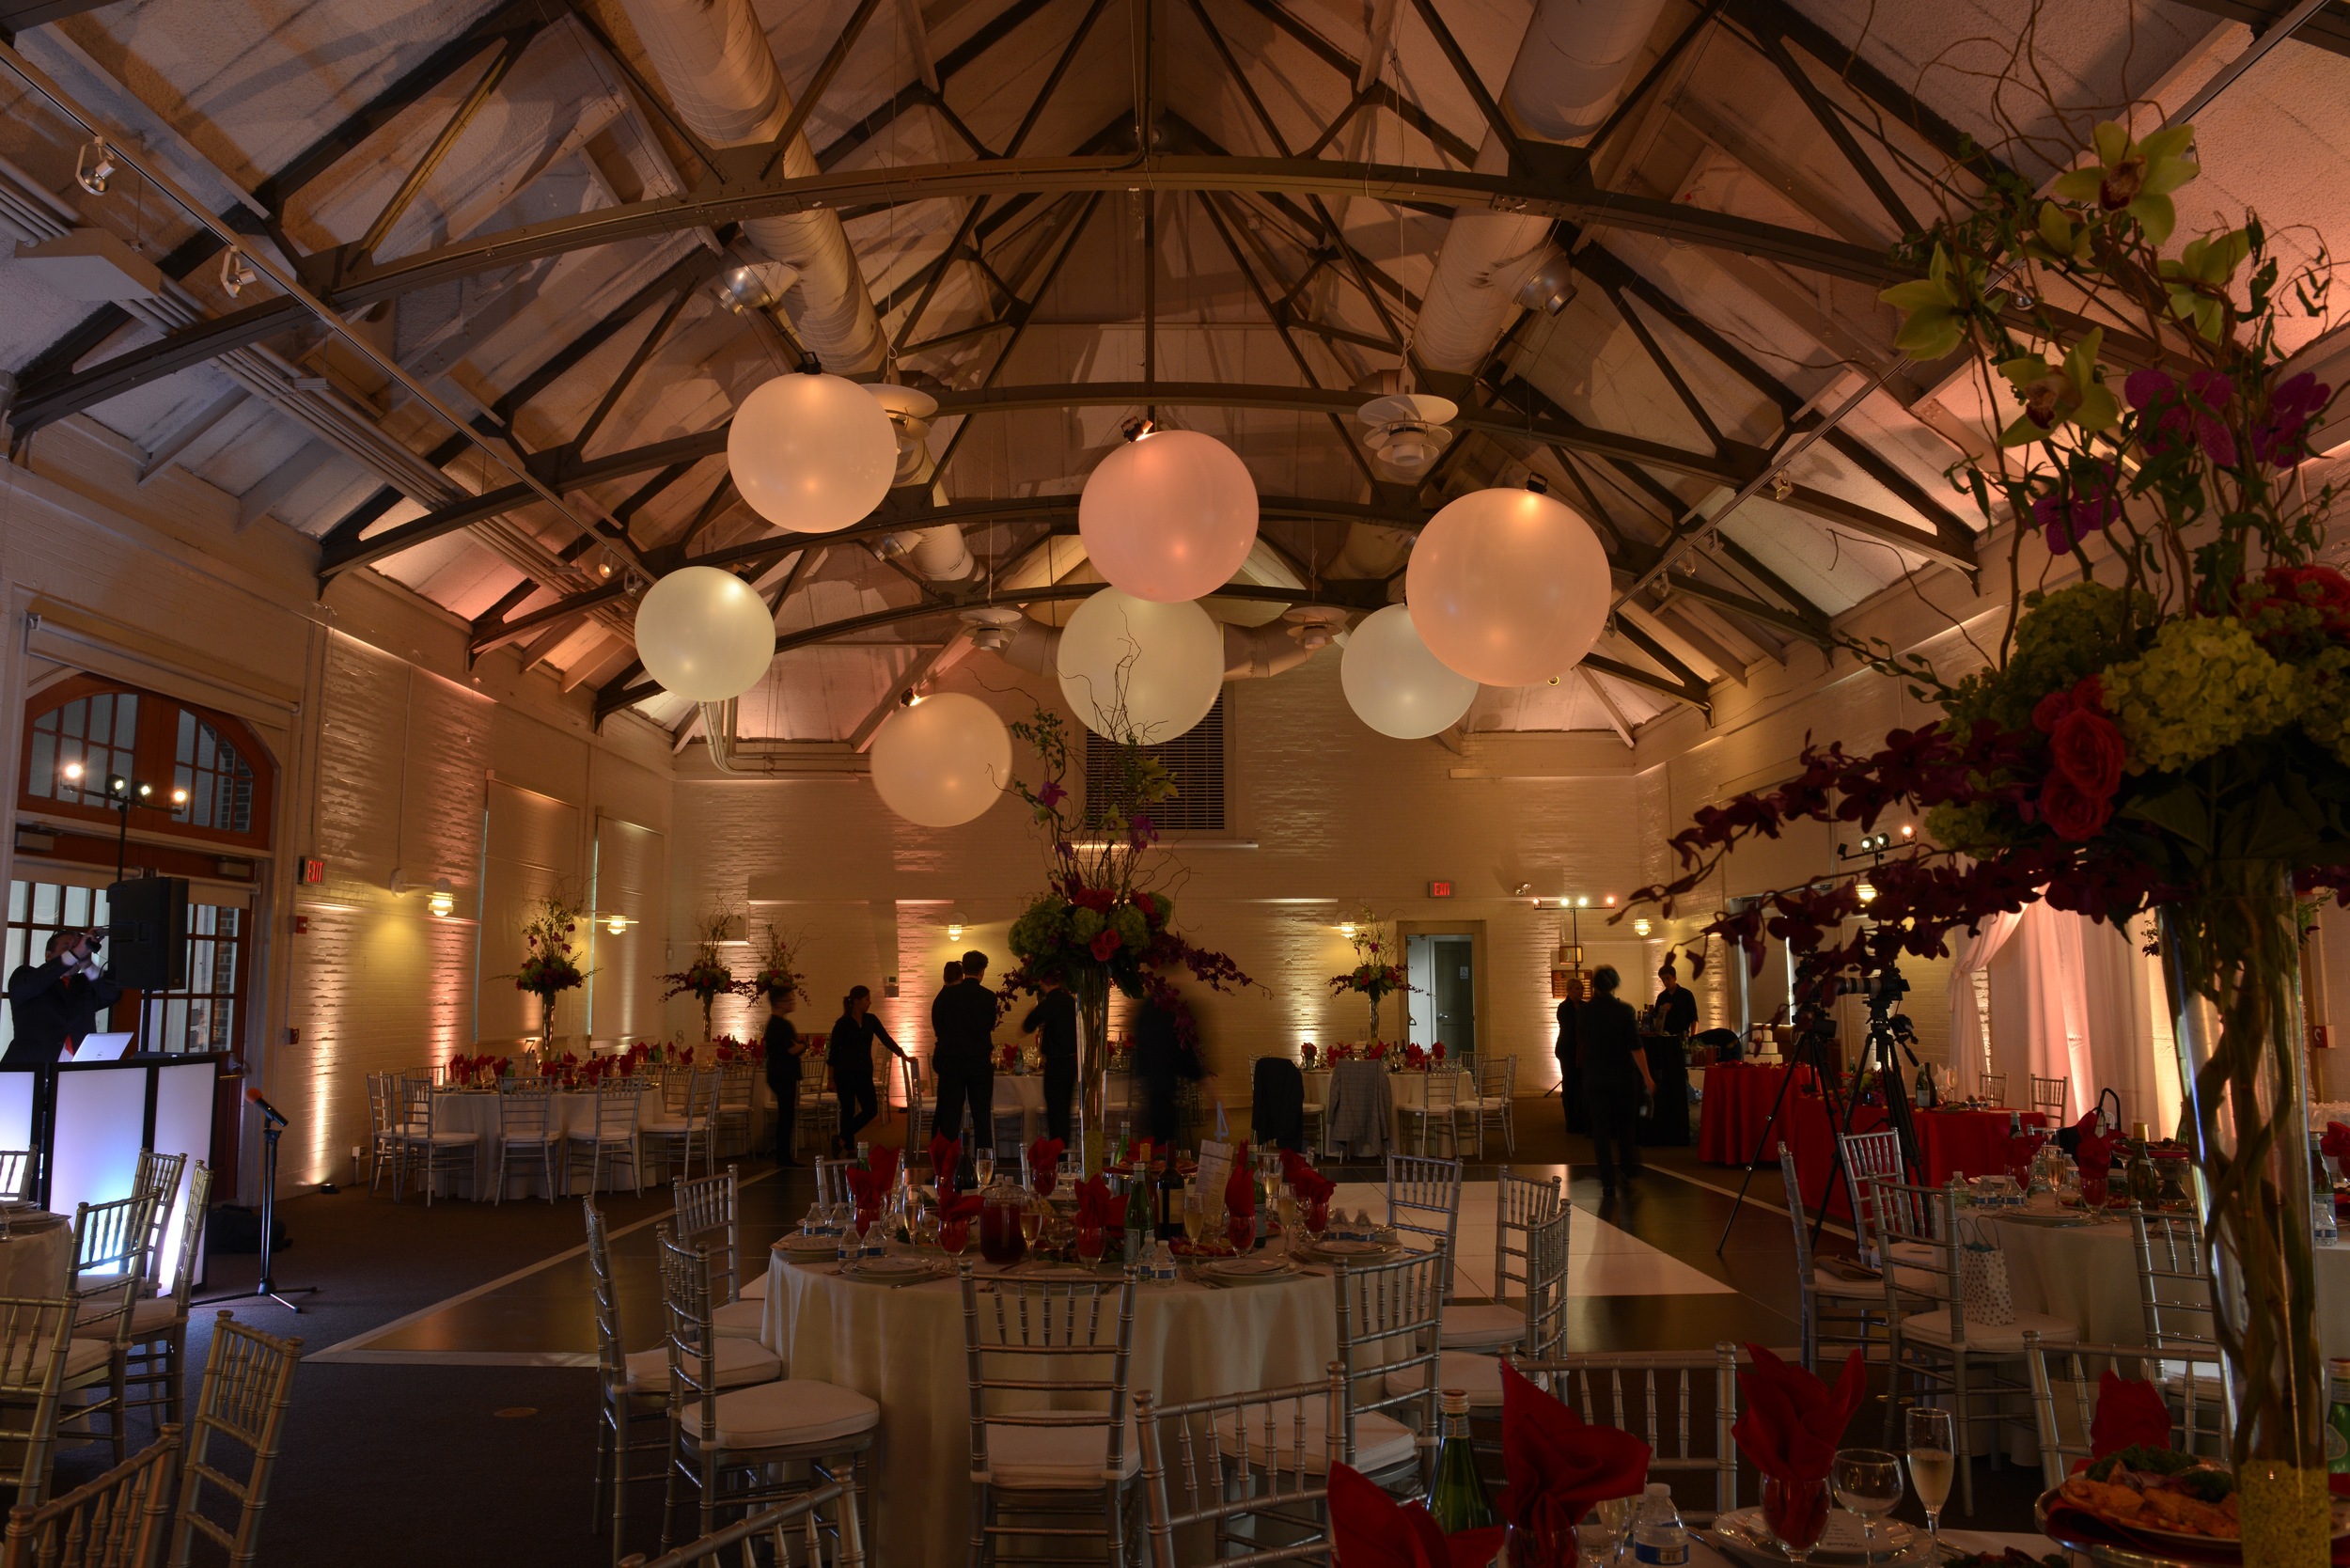 the interior of a wedding reception venue is lit with uplighting